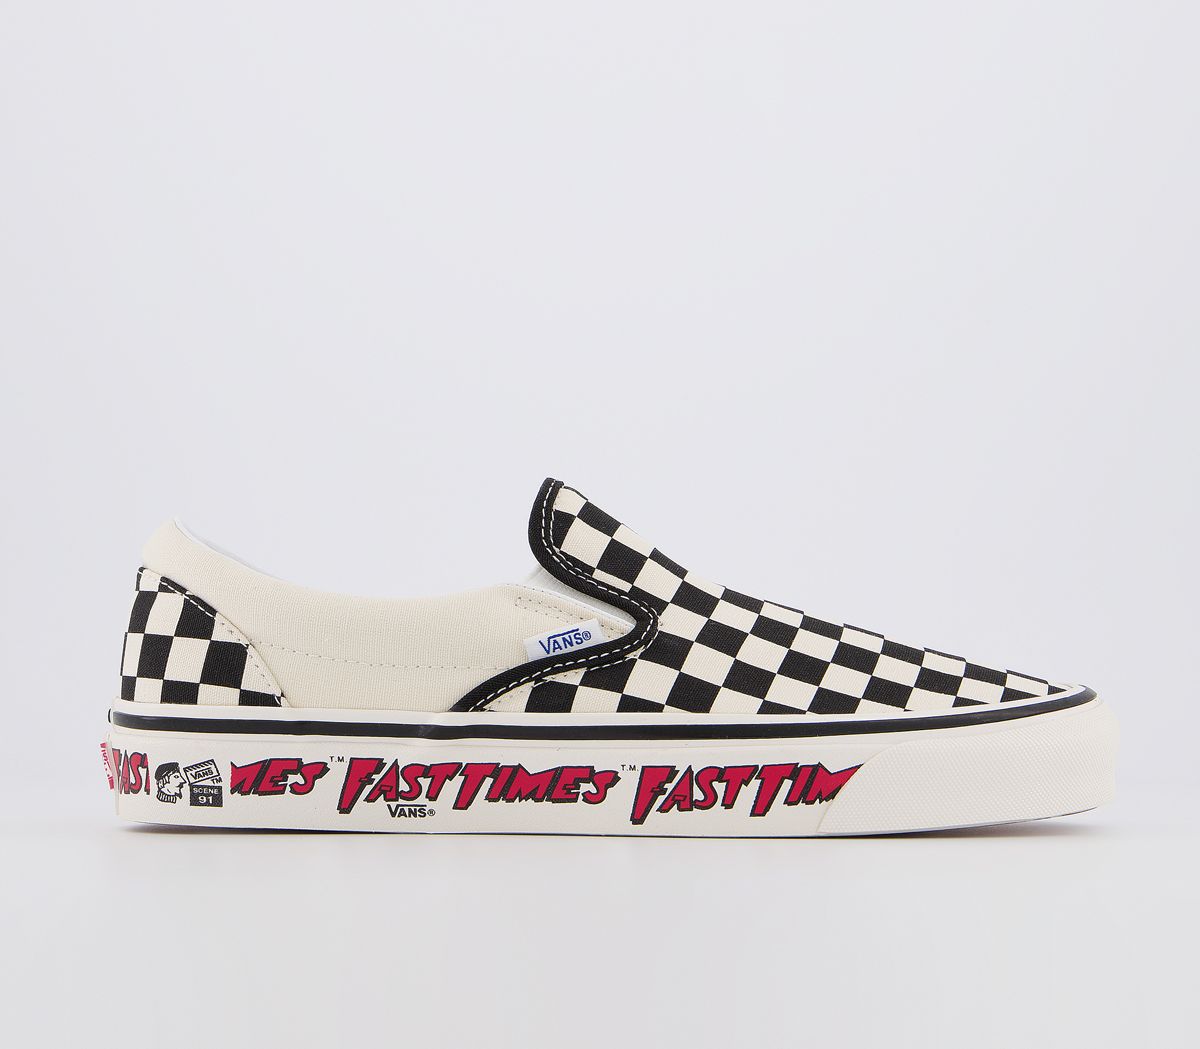 Vans Anaheim Classic Slip On 98 Dx Trainers Og Fast Times - His trainers